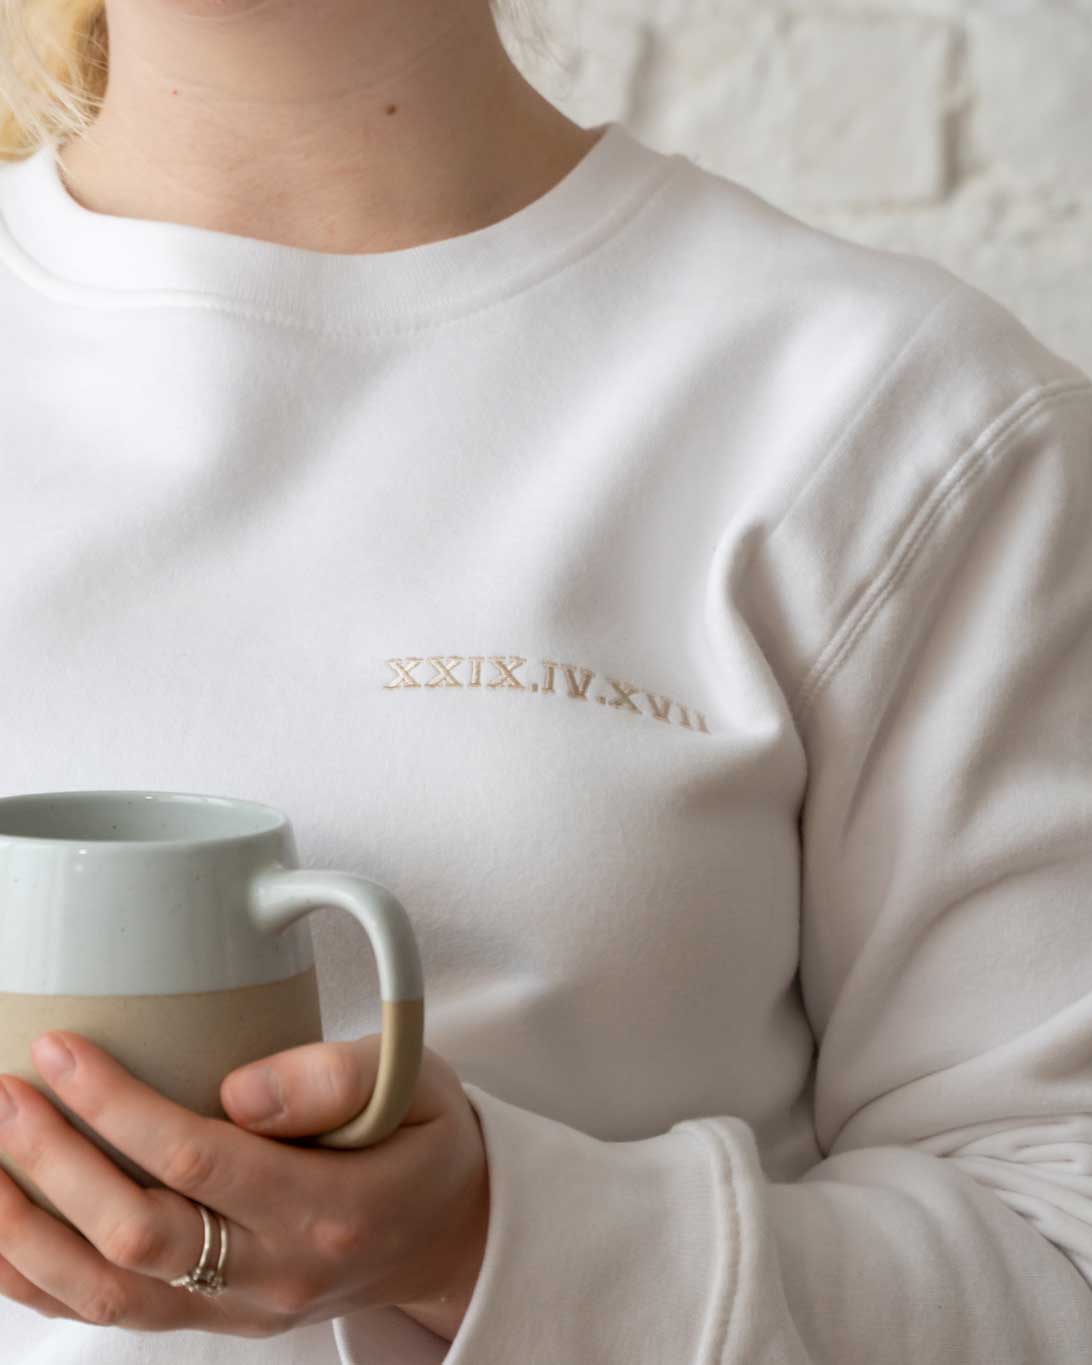 Embroidered Roman numerals Personalised Year Sweatshirt